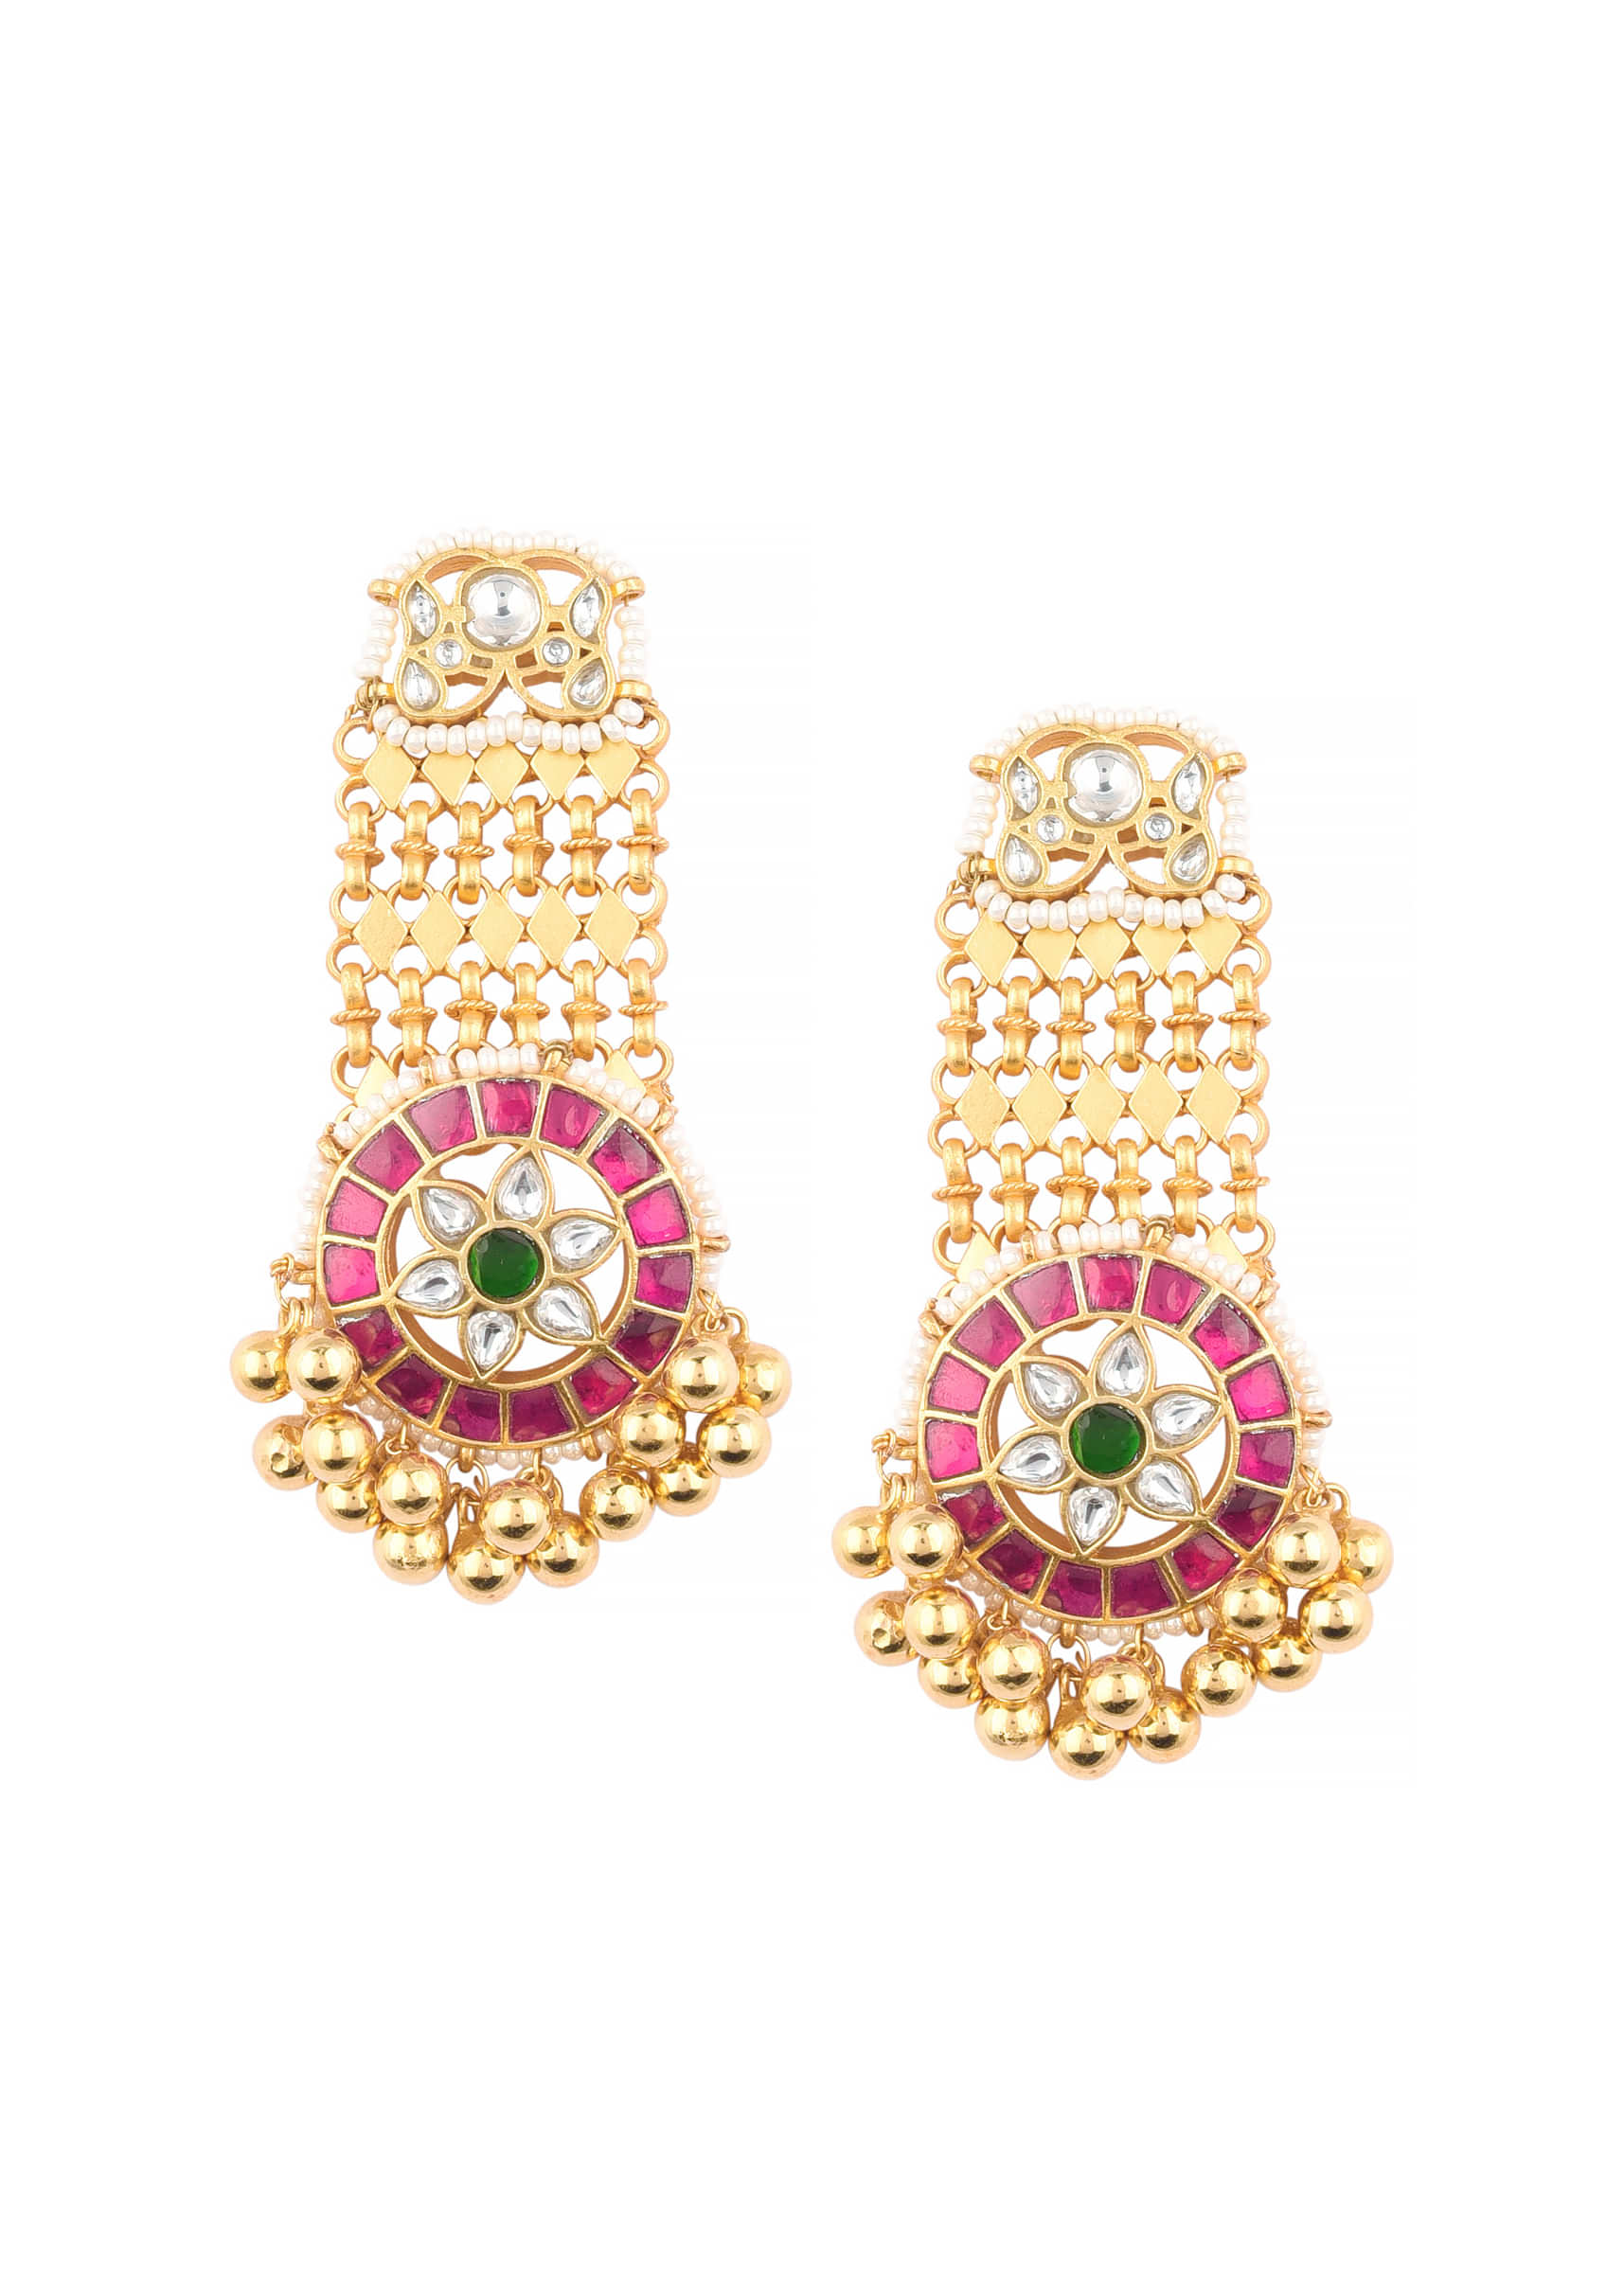 Gold Finish Kundan Polki Earrings With Beads And Green-Red Stones